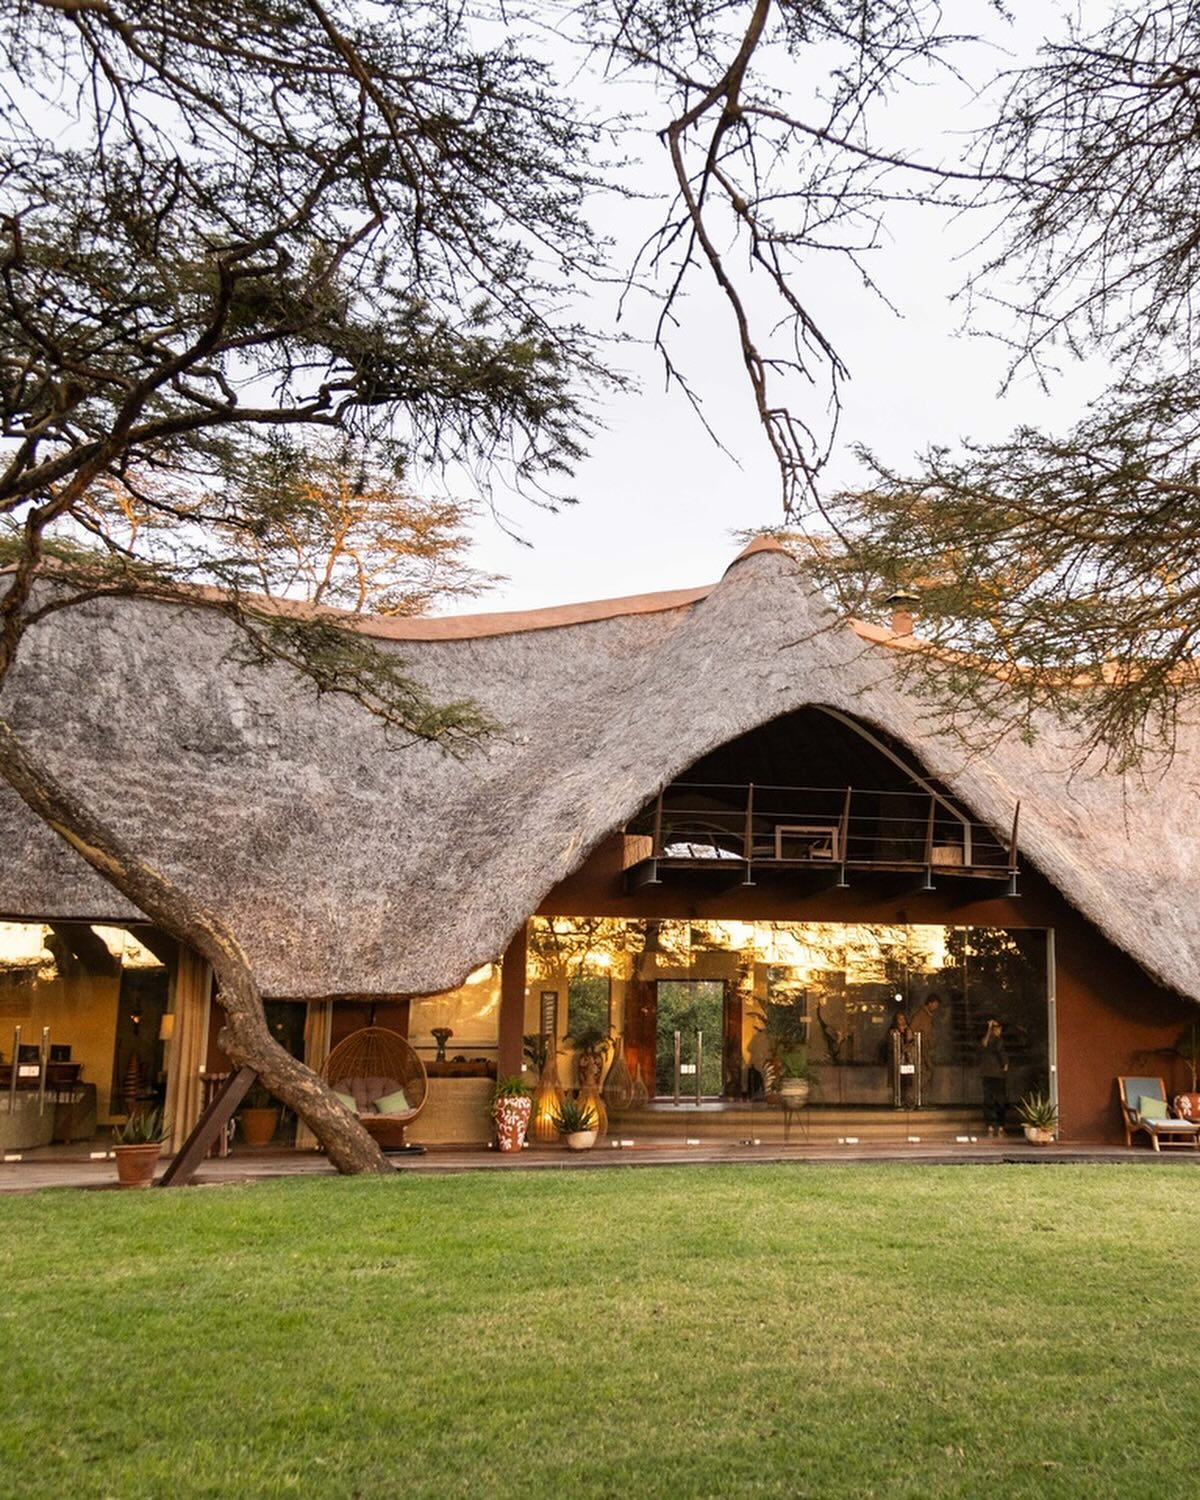 Escape to Solio Lodge, a haven nestled amongst Kenya’s wildlife. Our lodge is an oasis of tranquillity, embracing the natural world with its verdant theme. Discover diverse wildlife, watch dramatic sunsets and learn about the myriad of birdlife from our expert guides 🥂 

#DiscoverTheSafariCollection #WelcomeToKenya #TheSafariCollection #SolioLodge #Conservation #Rhino #BlackRhino #WhiteRhino #RhinoConservation #Sundowner #MountKenya